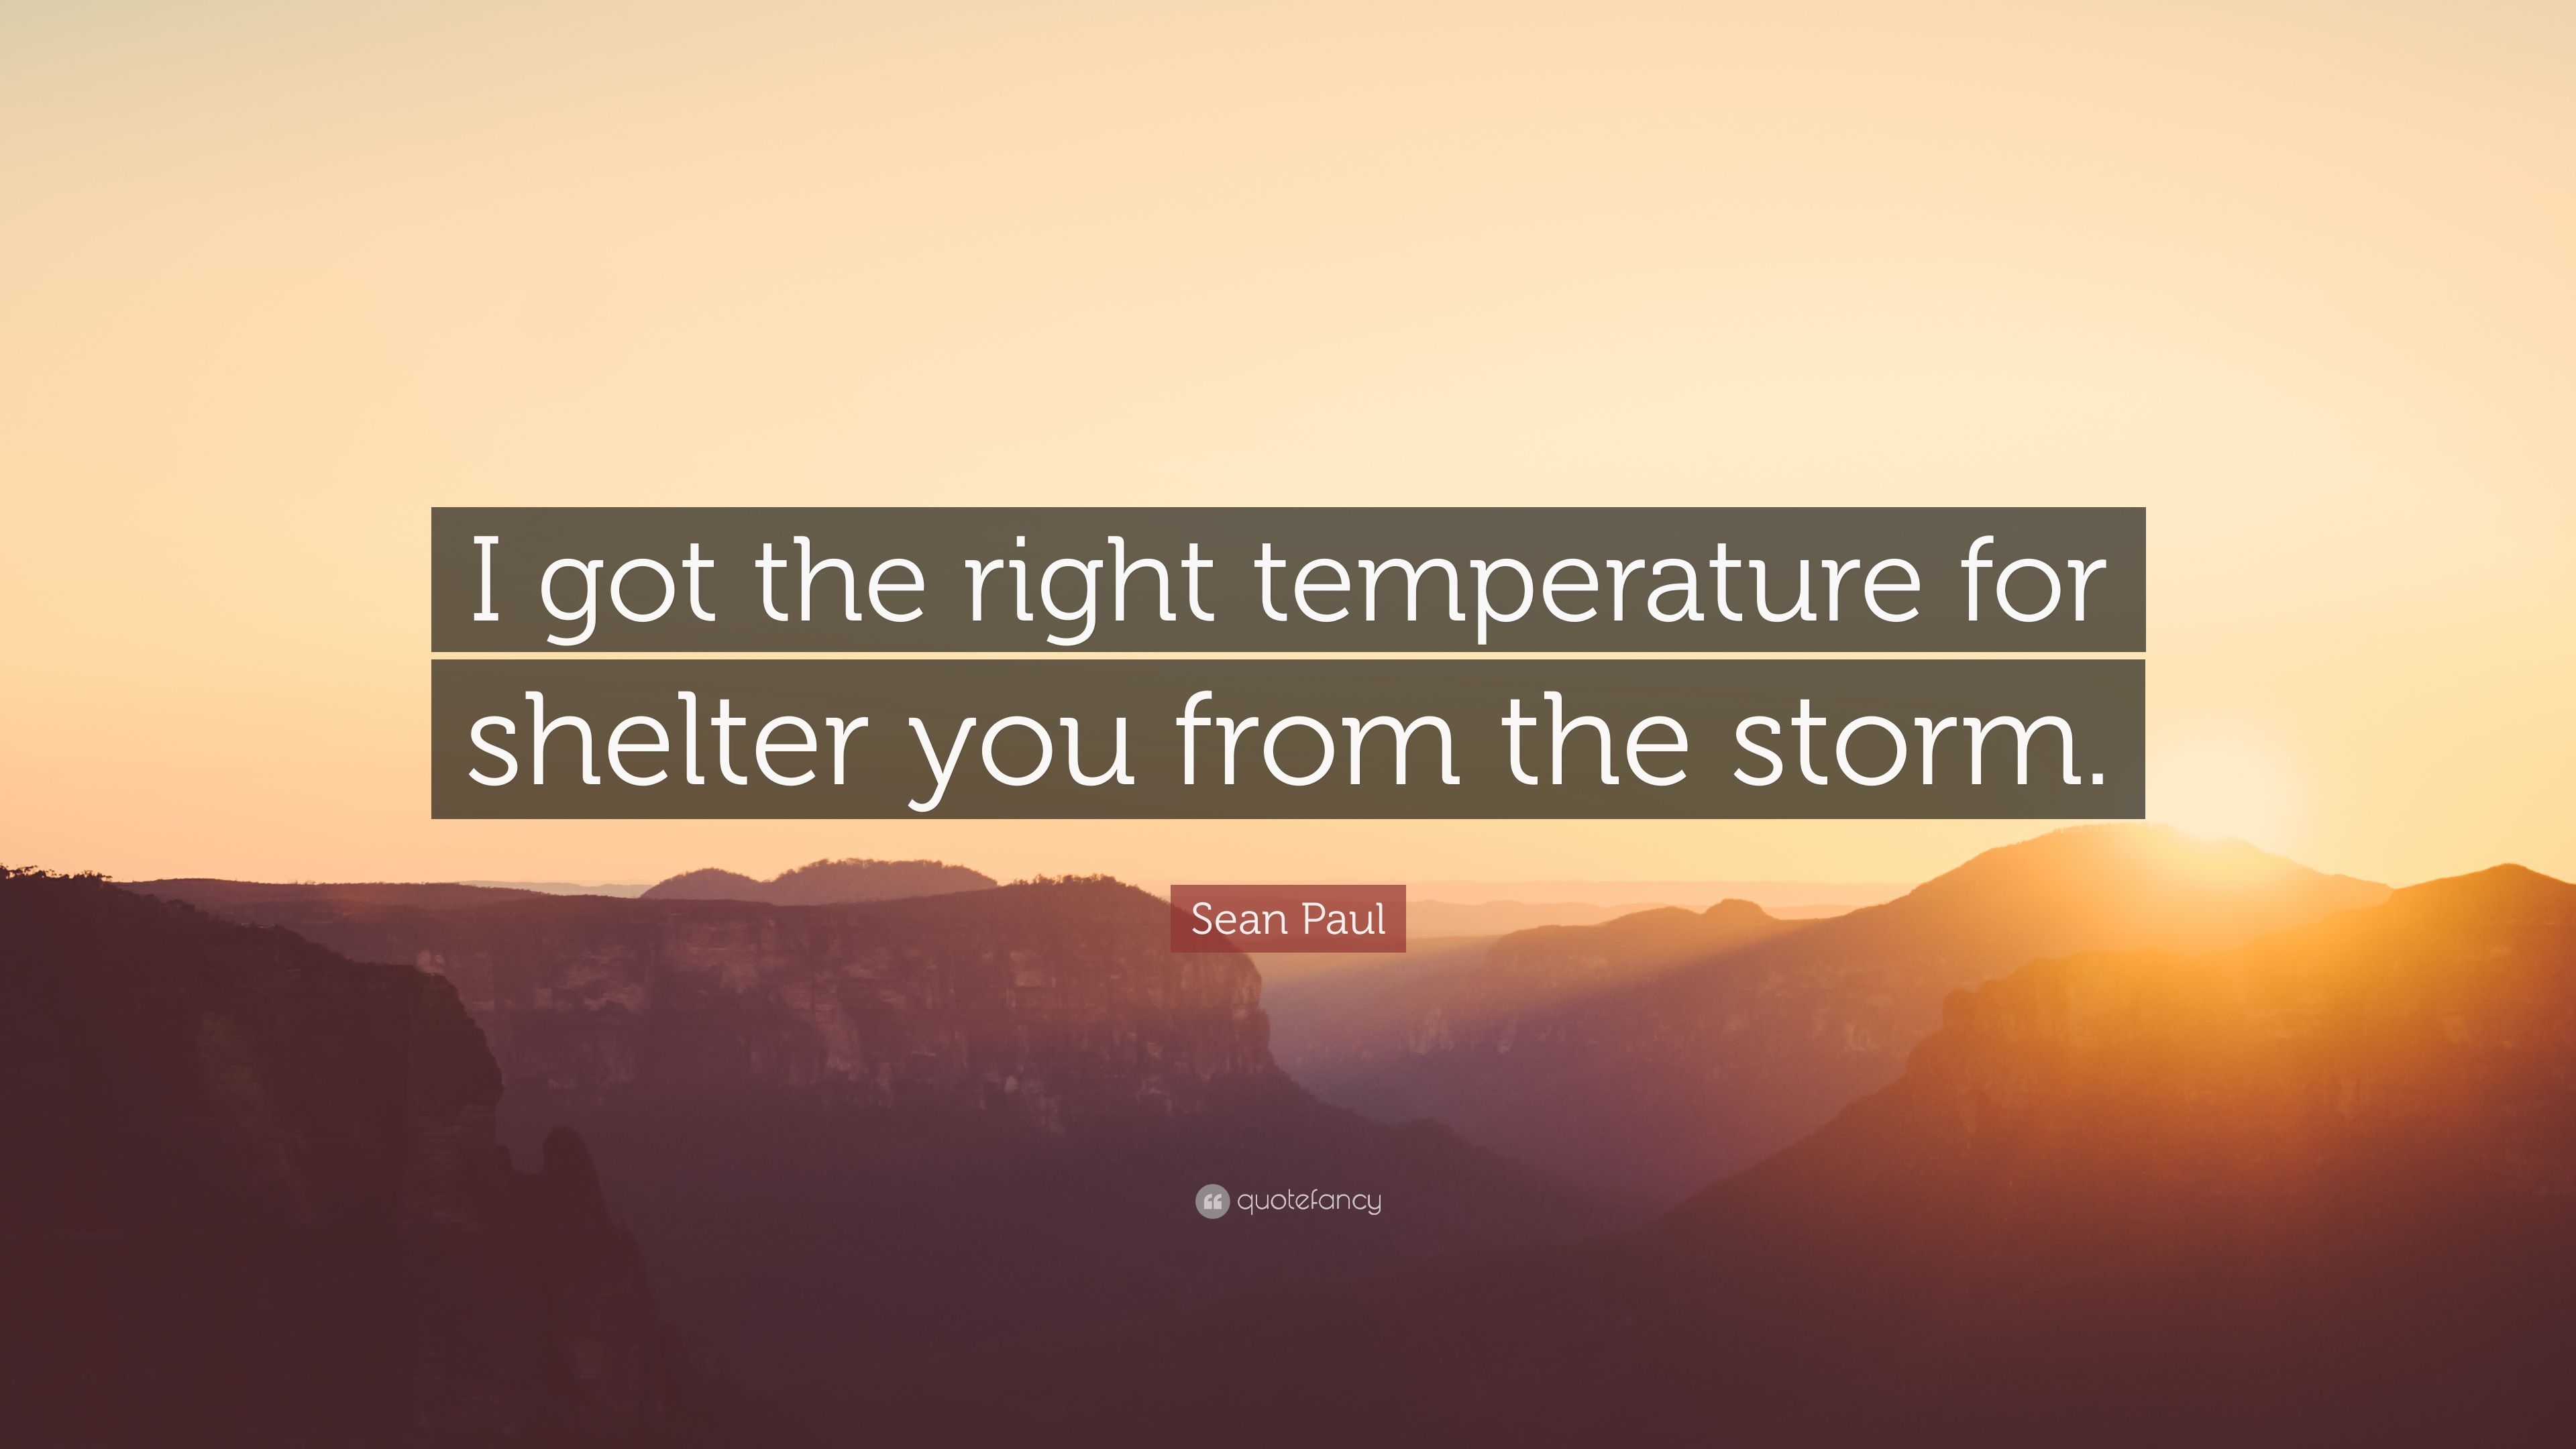 Sean Paul Quote: “I got the right temperature for shelter you